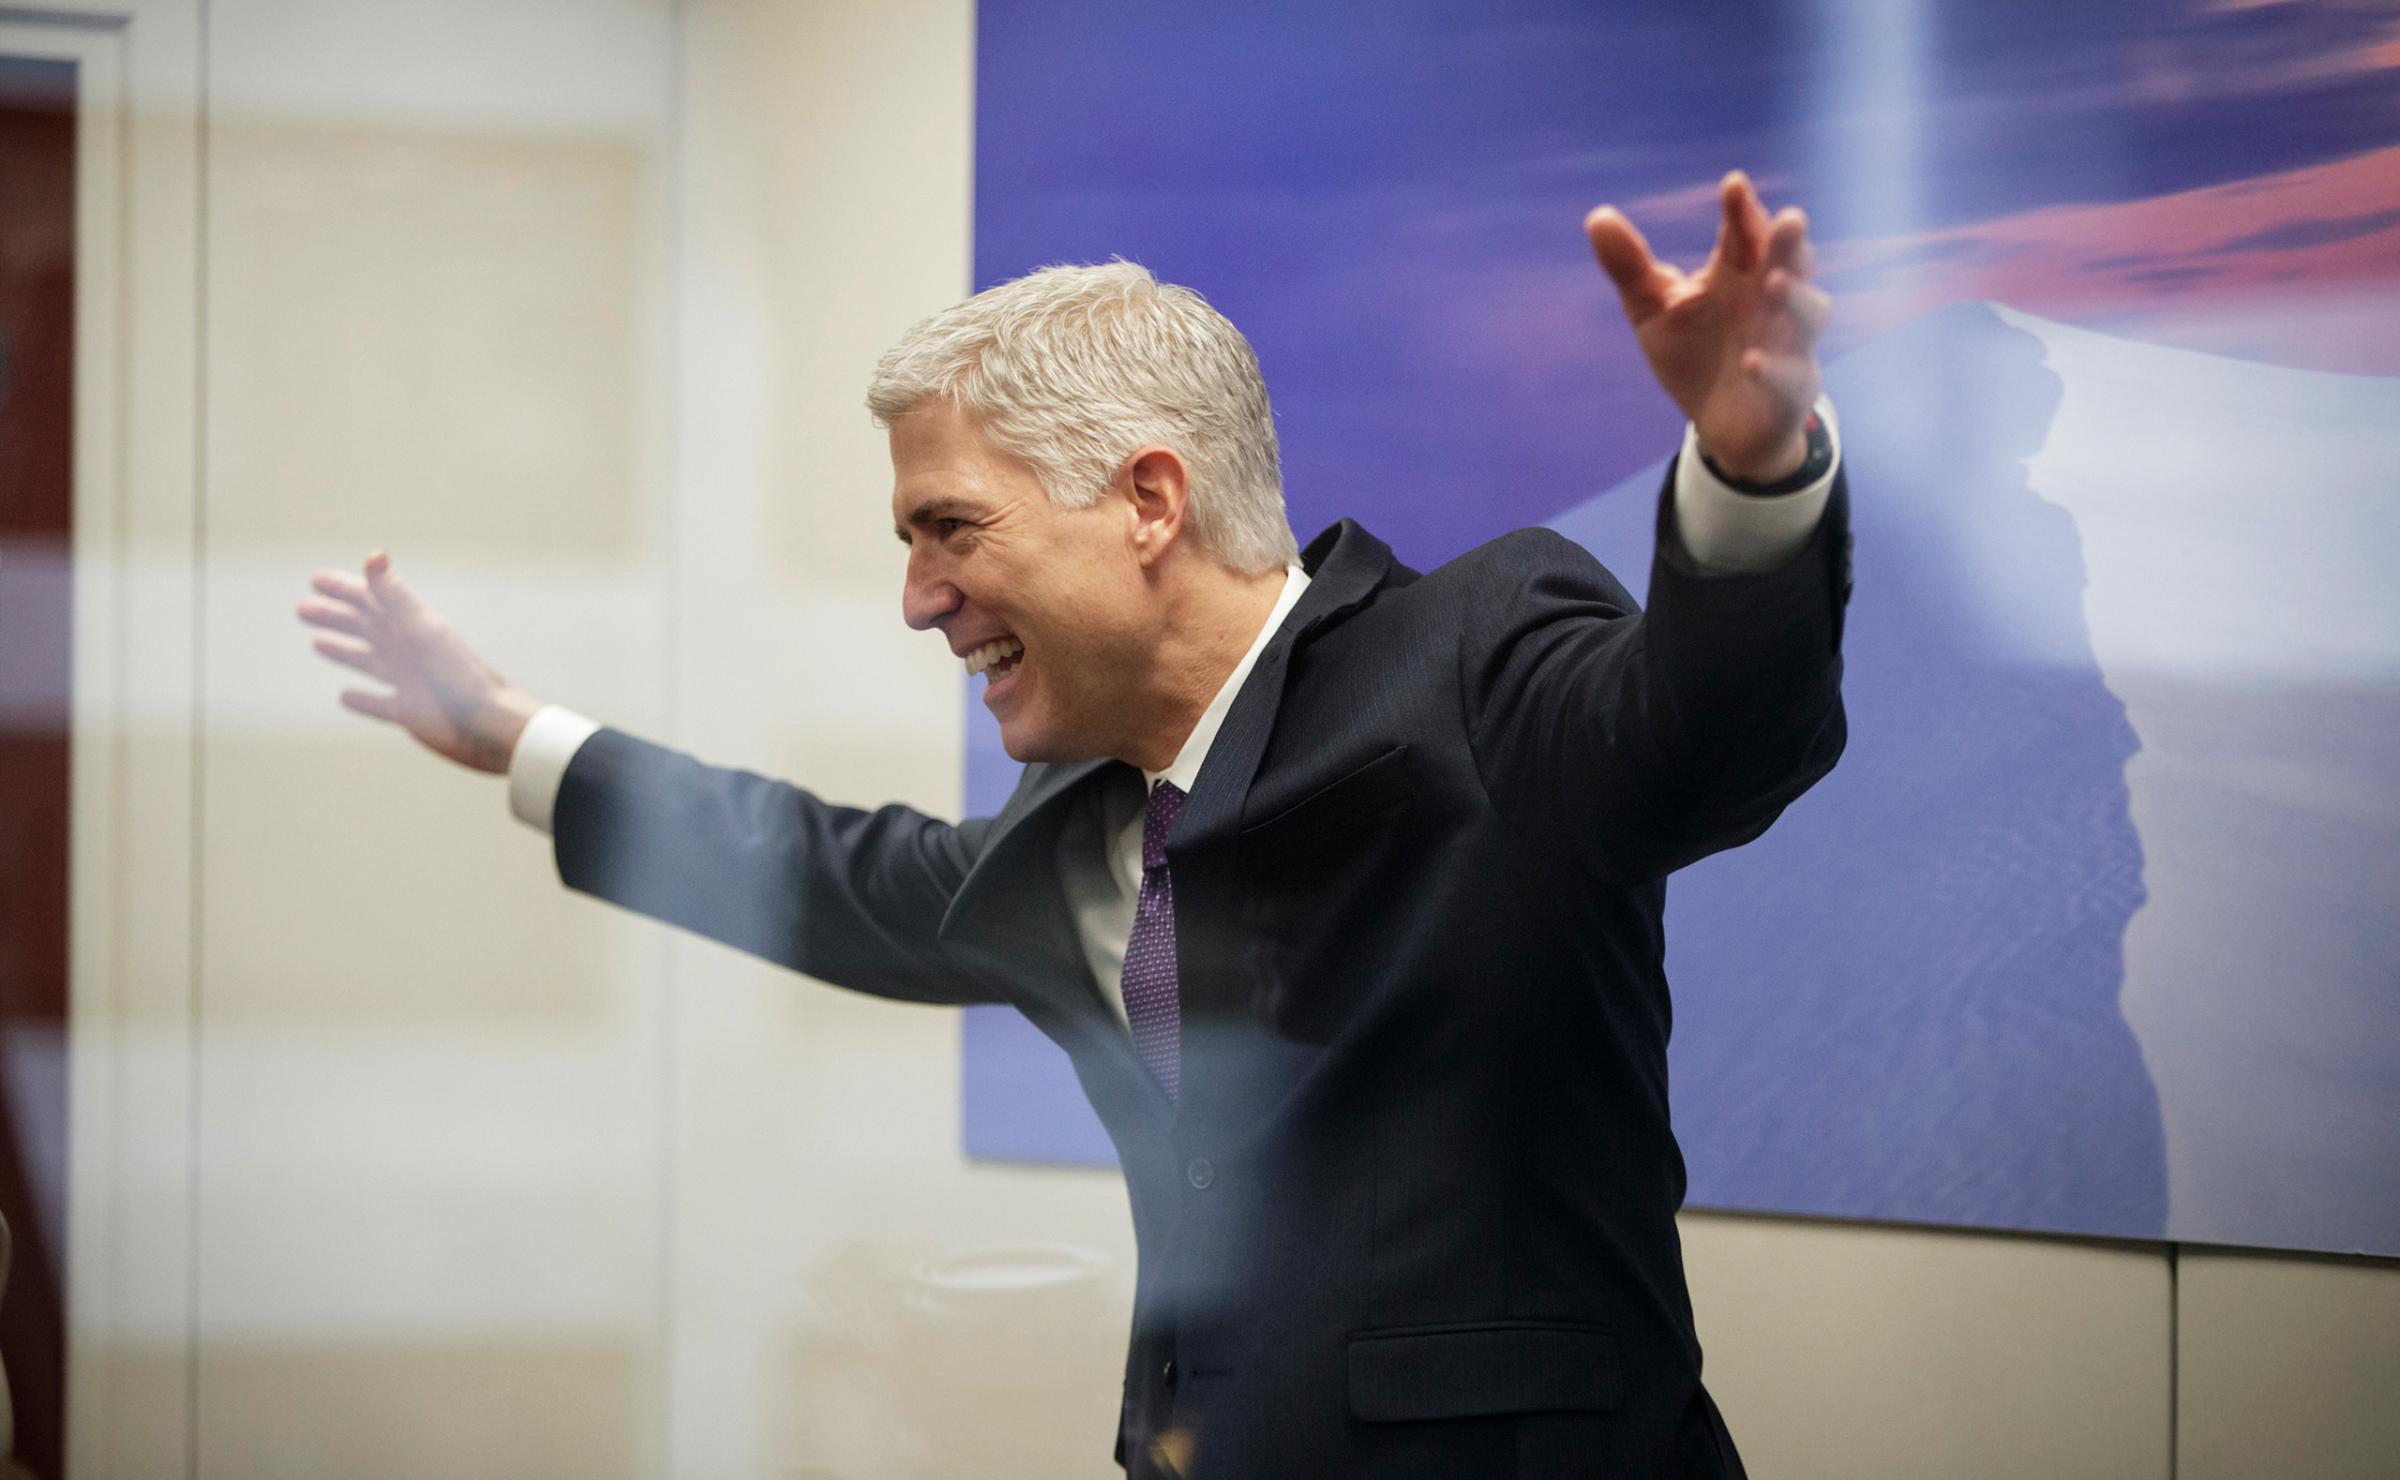 Supreme Court Justice nominee Neil Gorsuch, seen through glass, makes an animated gesture while speaking with staff members before his meeting with Sen. Tom Udall, D-N.M., Feb. 27, 2017, on Capitol Hill in Washington. D.C.